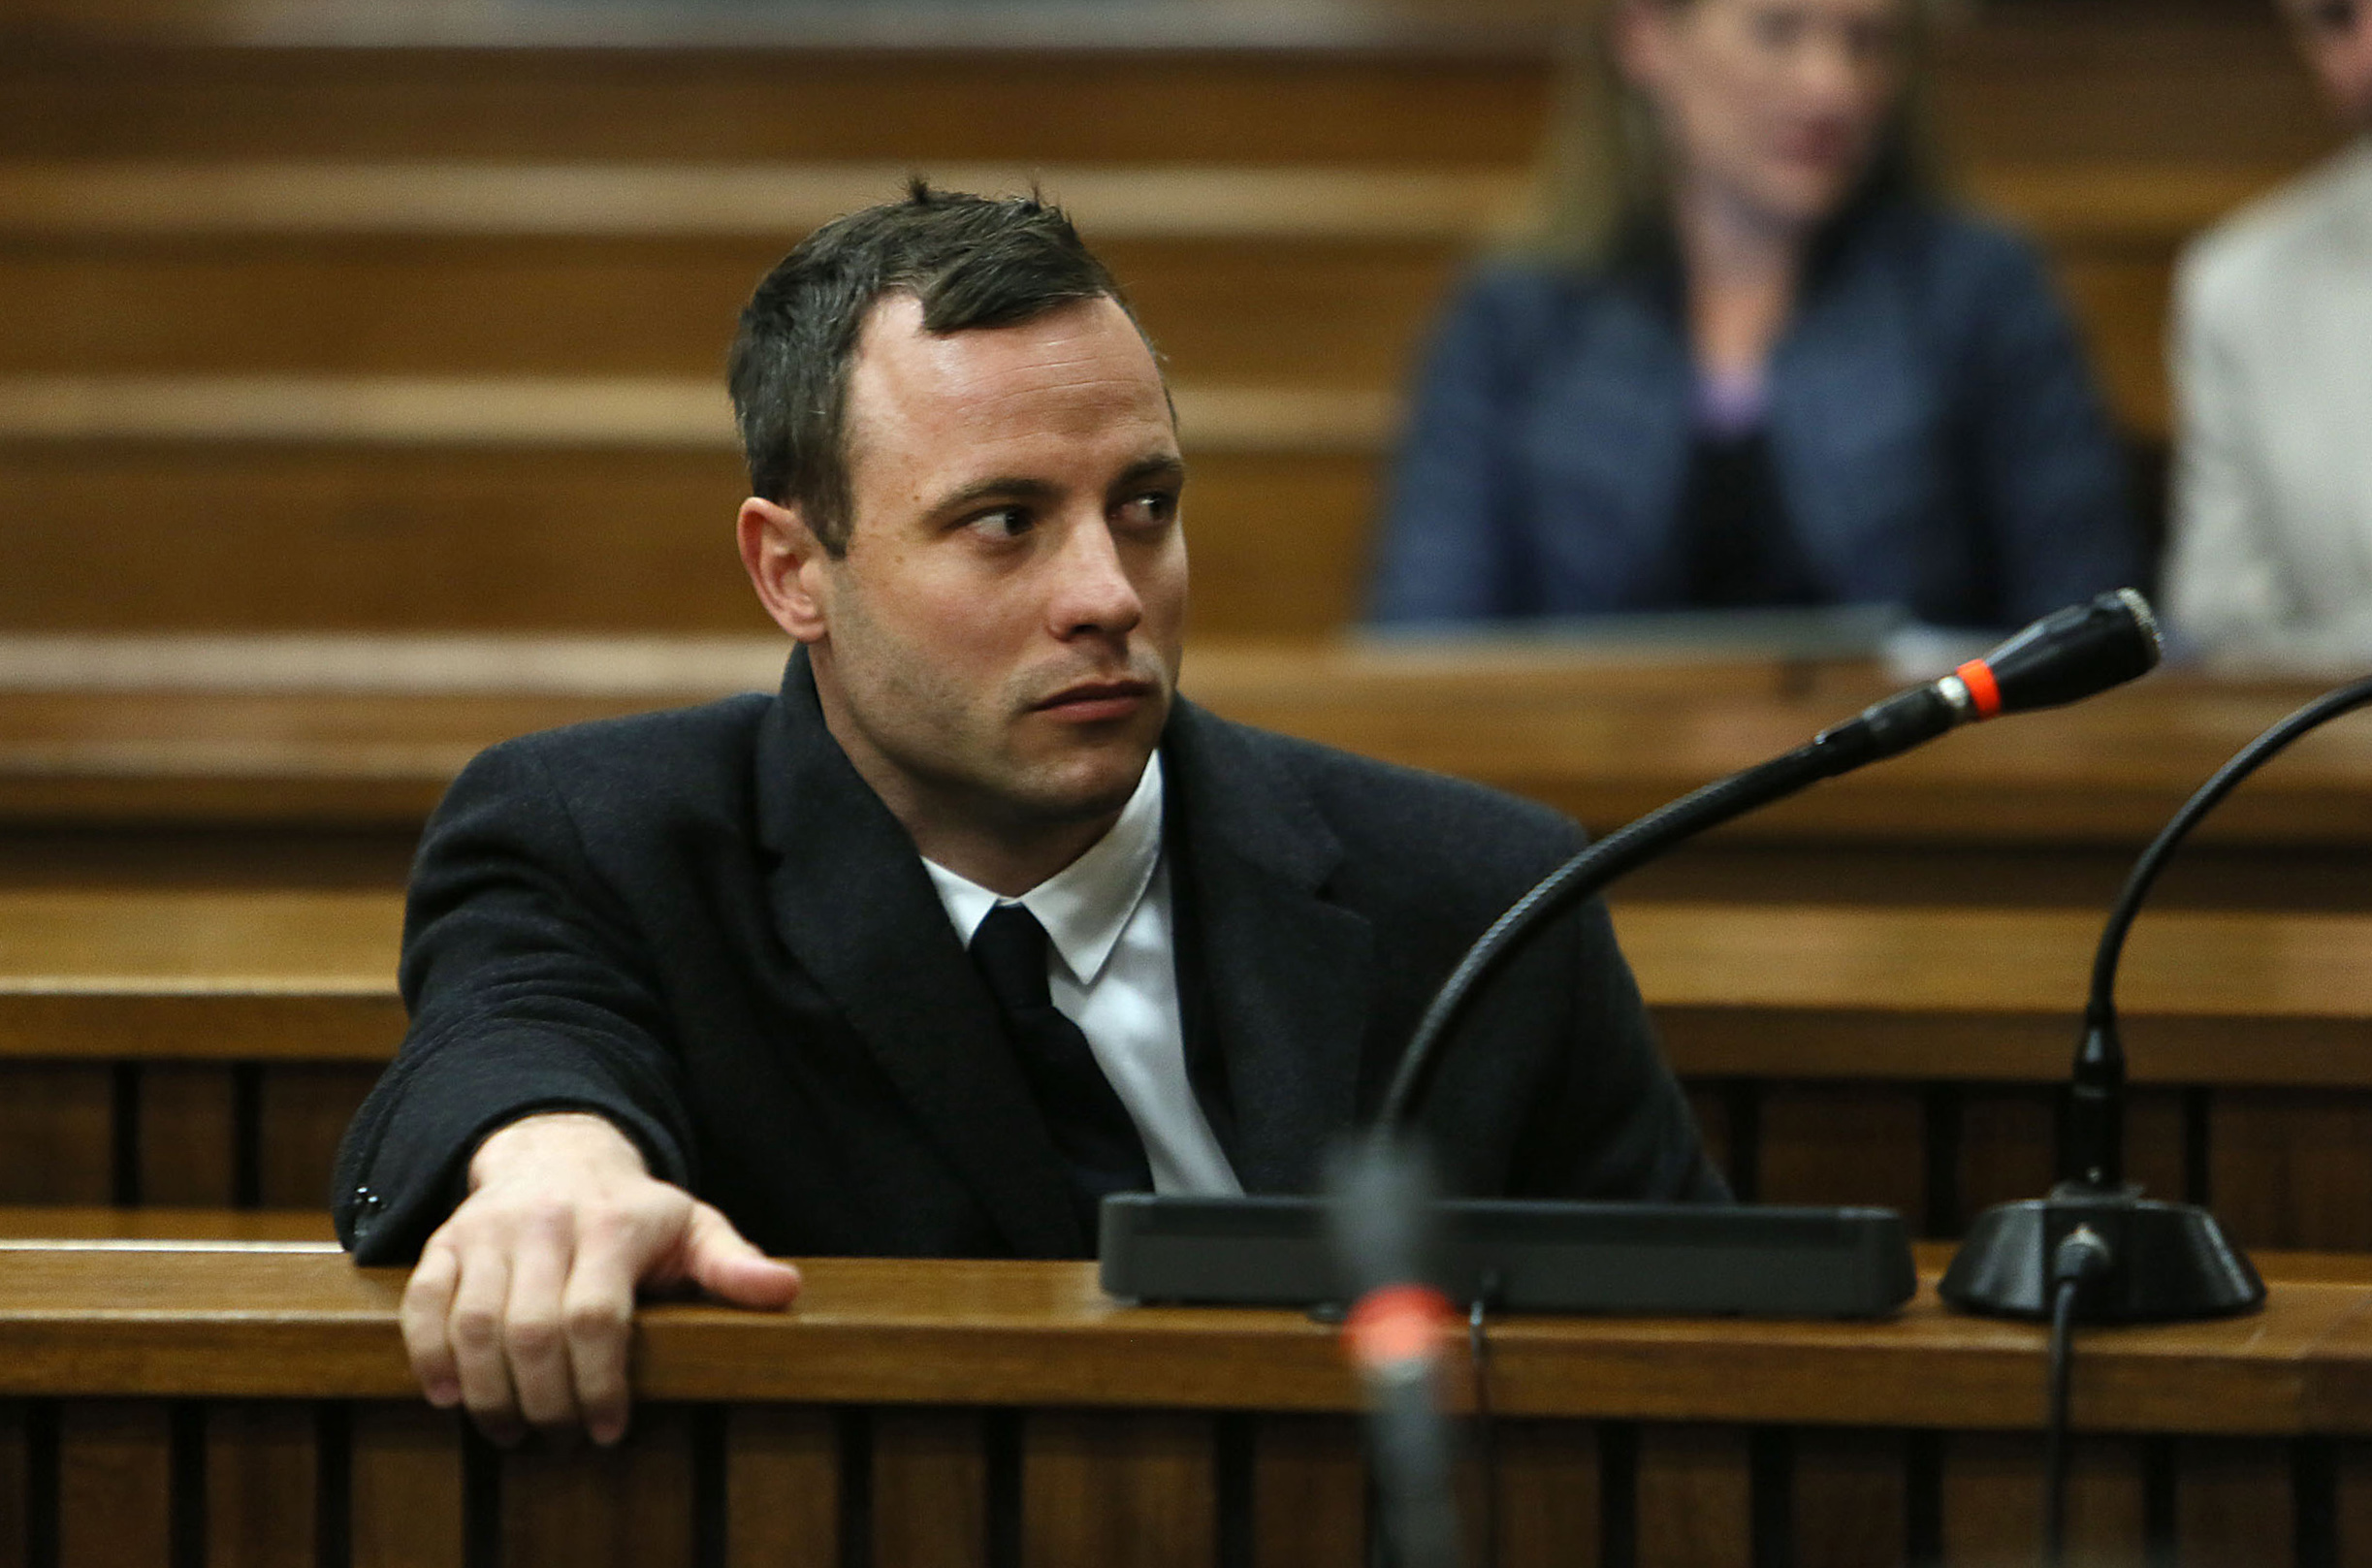 PHOTO: Oscar Pistorius attends court at his murder trial for the shooting death of his girlfriend Reeva Steenkamp on St. Valentine's Day 2013 in Pretoria, South Africa, July 8, 2014.